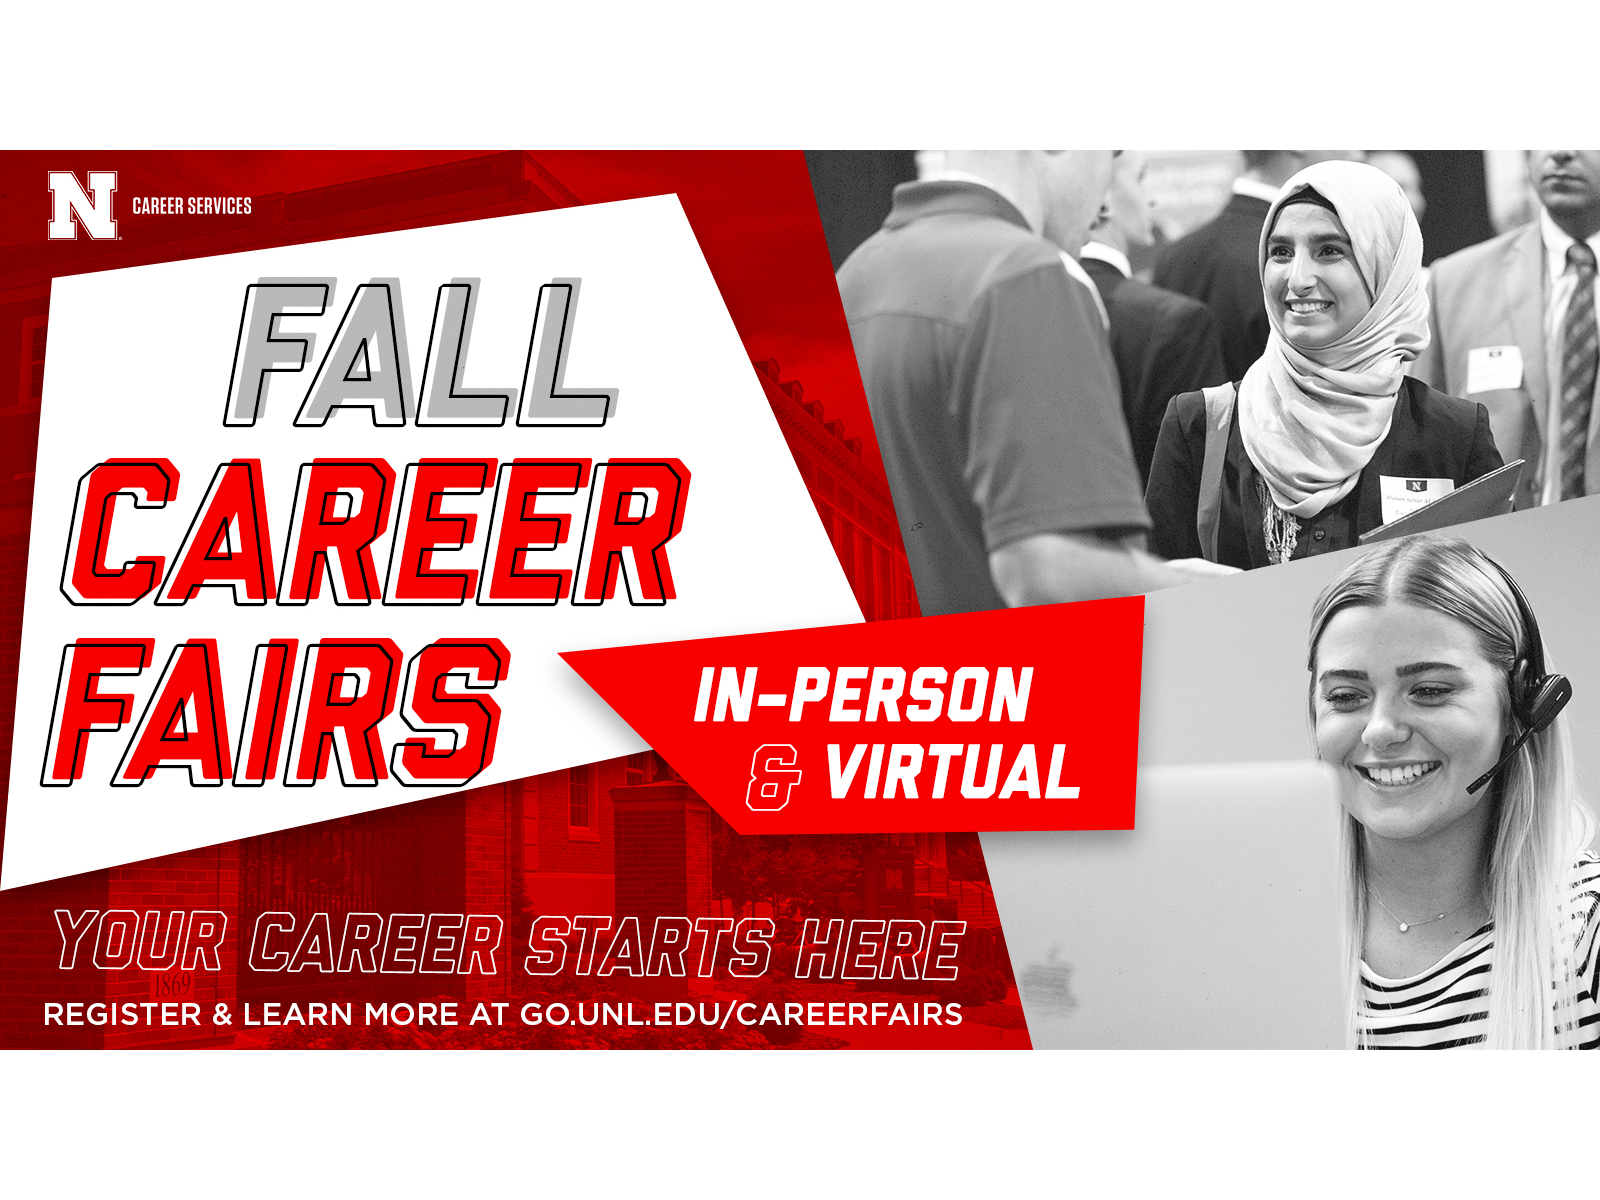 Fall Career Fairs are 2 weeks away...what you need to know to get ready